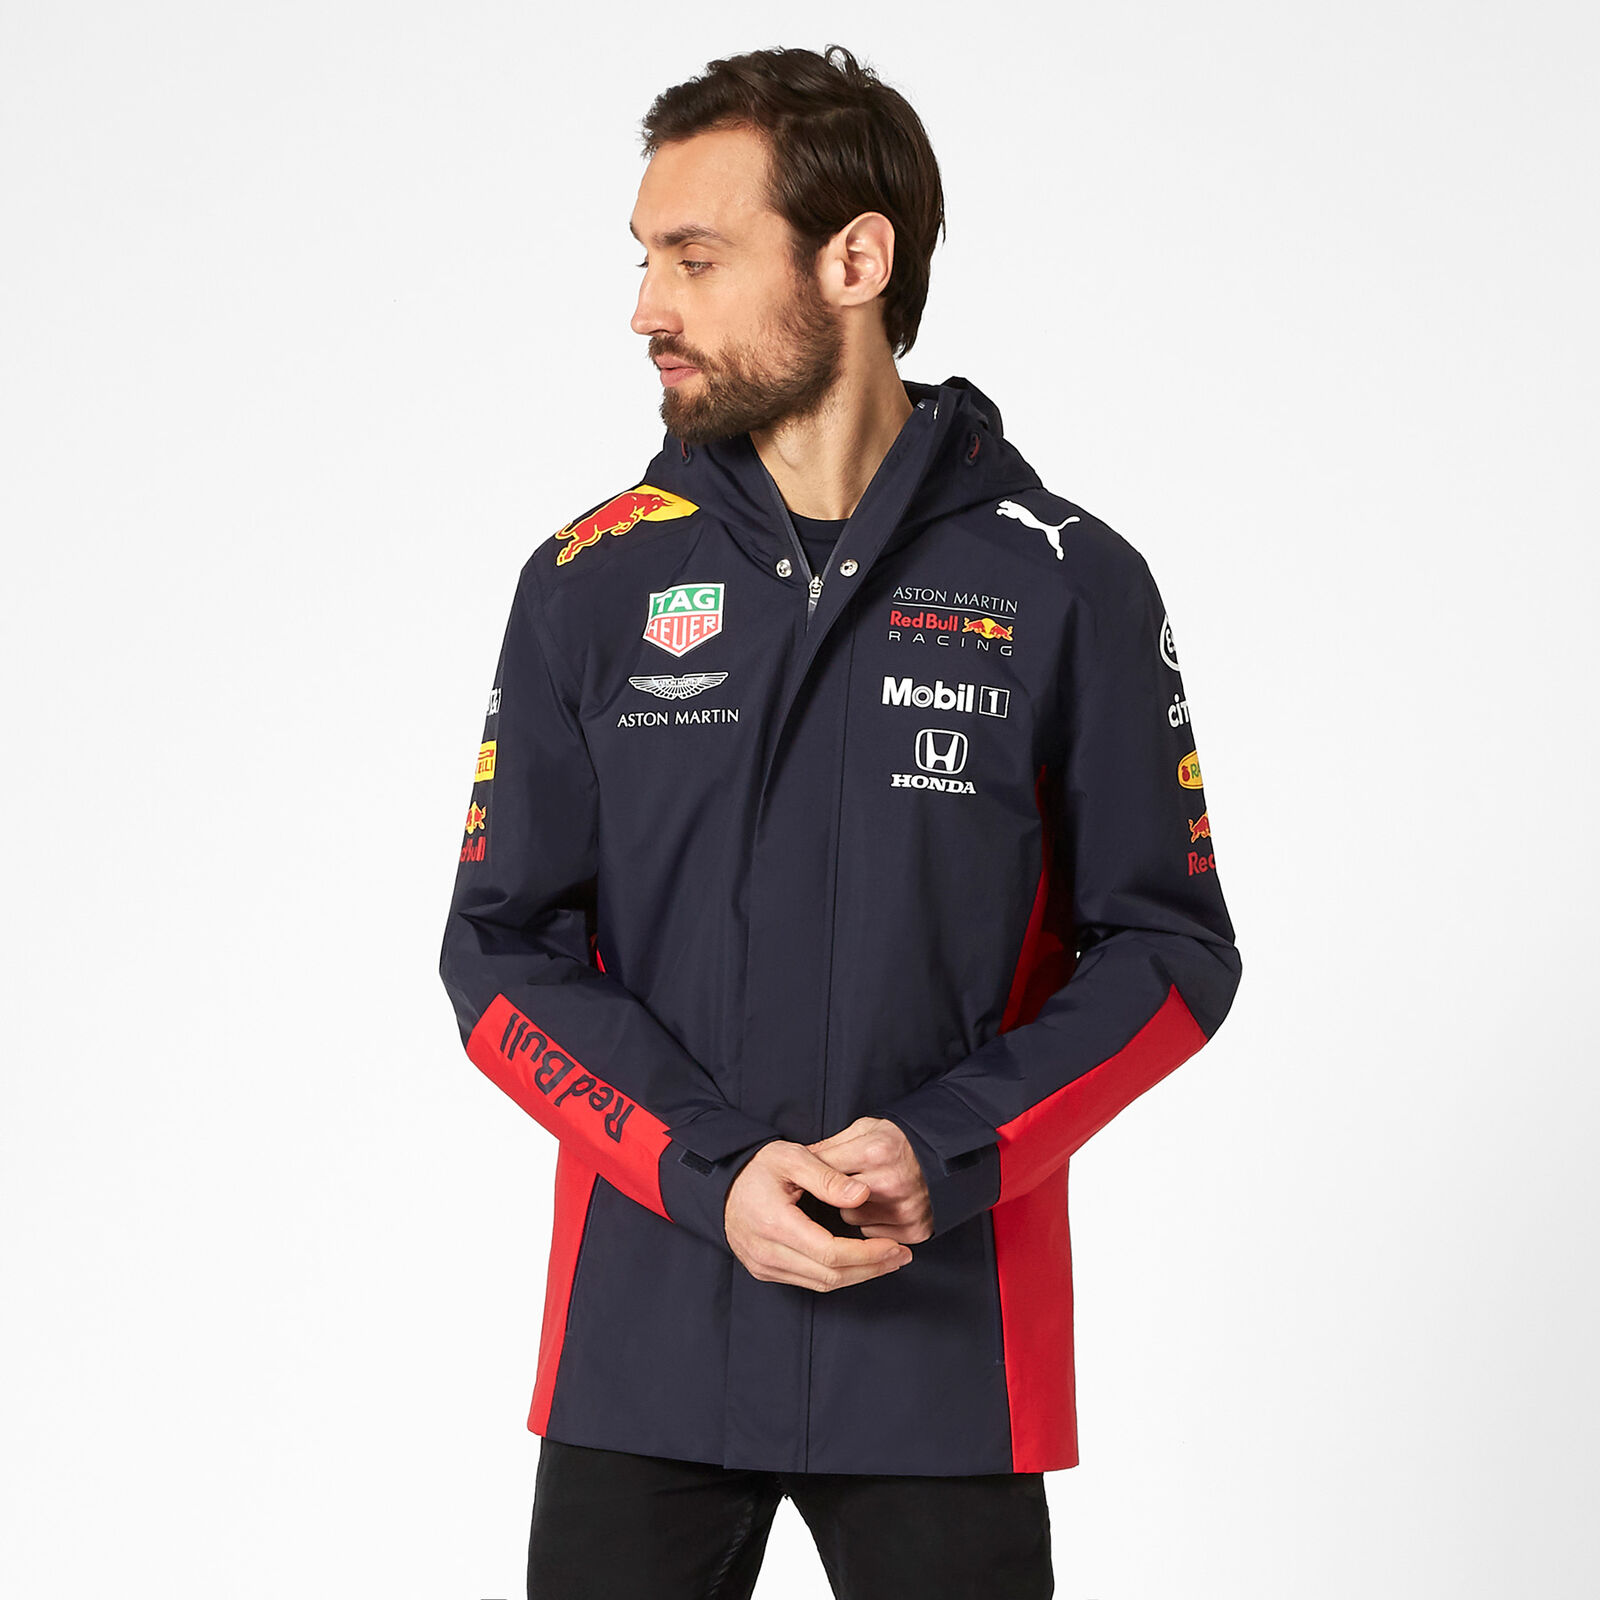 2020 Team Jacket - Red Bull Fuel For Fans